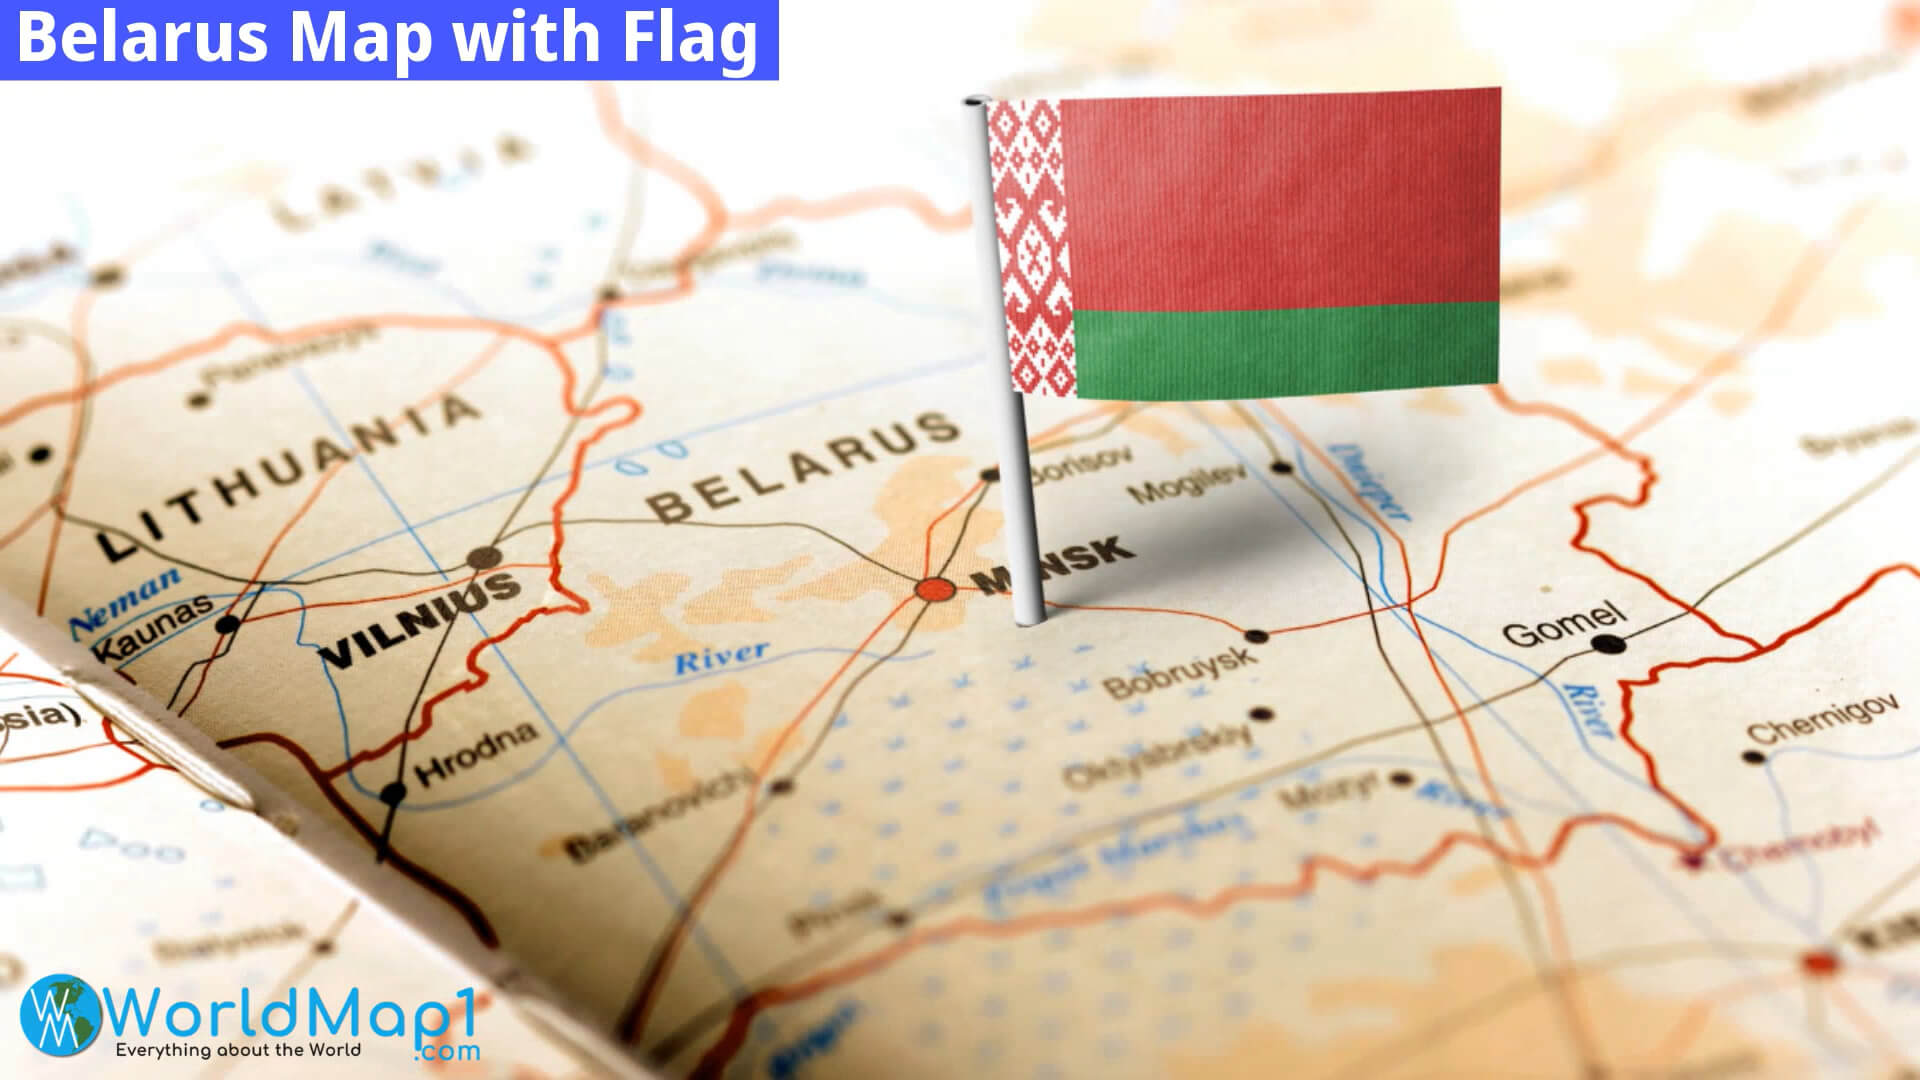 Belarus Map with Flag